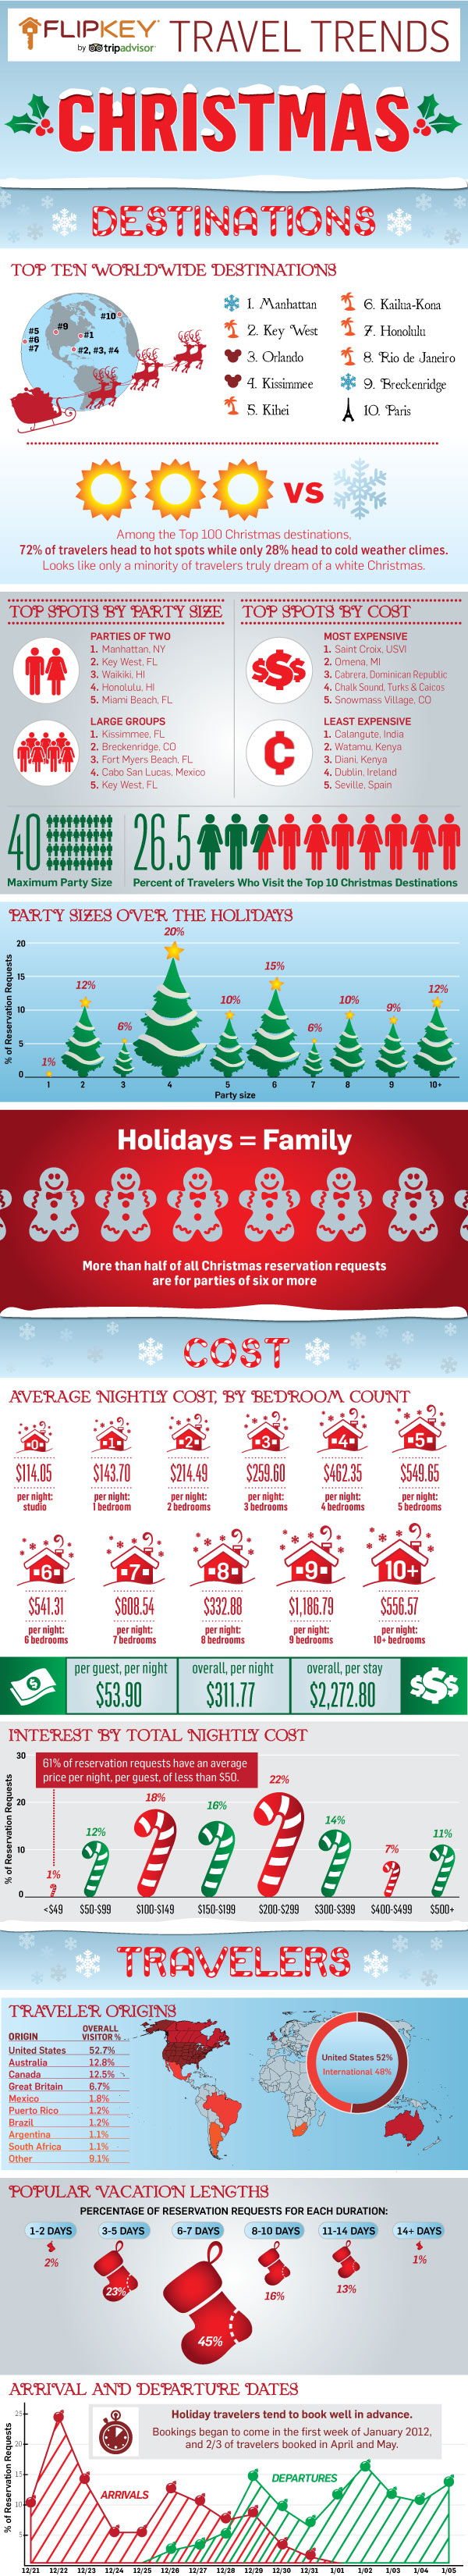 Christmas Travel Trends: Surf Beats Snow in 2012